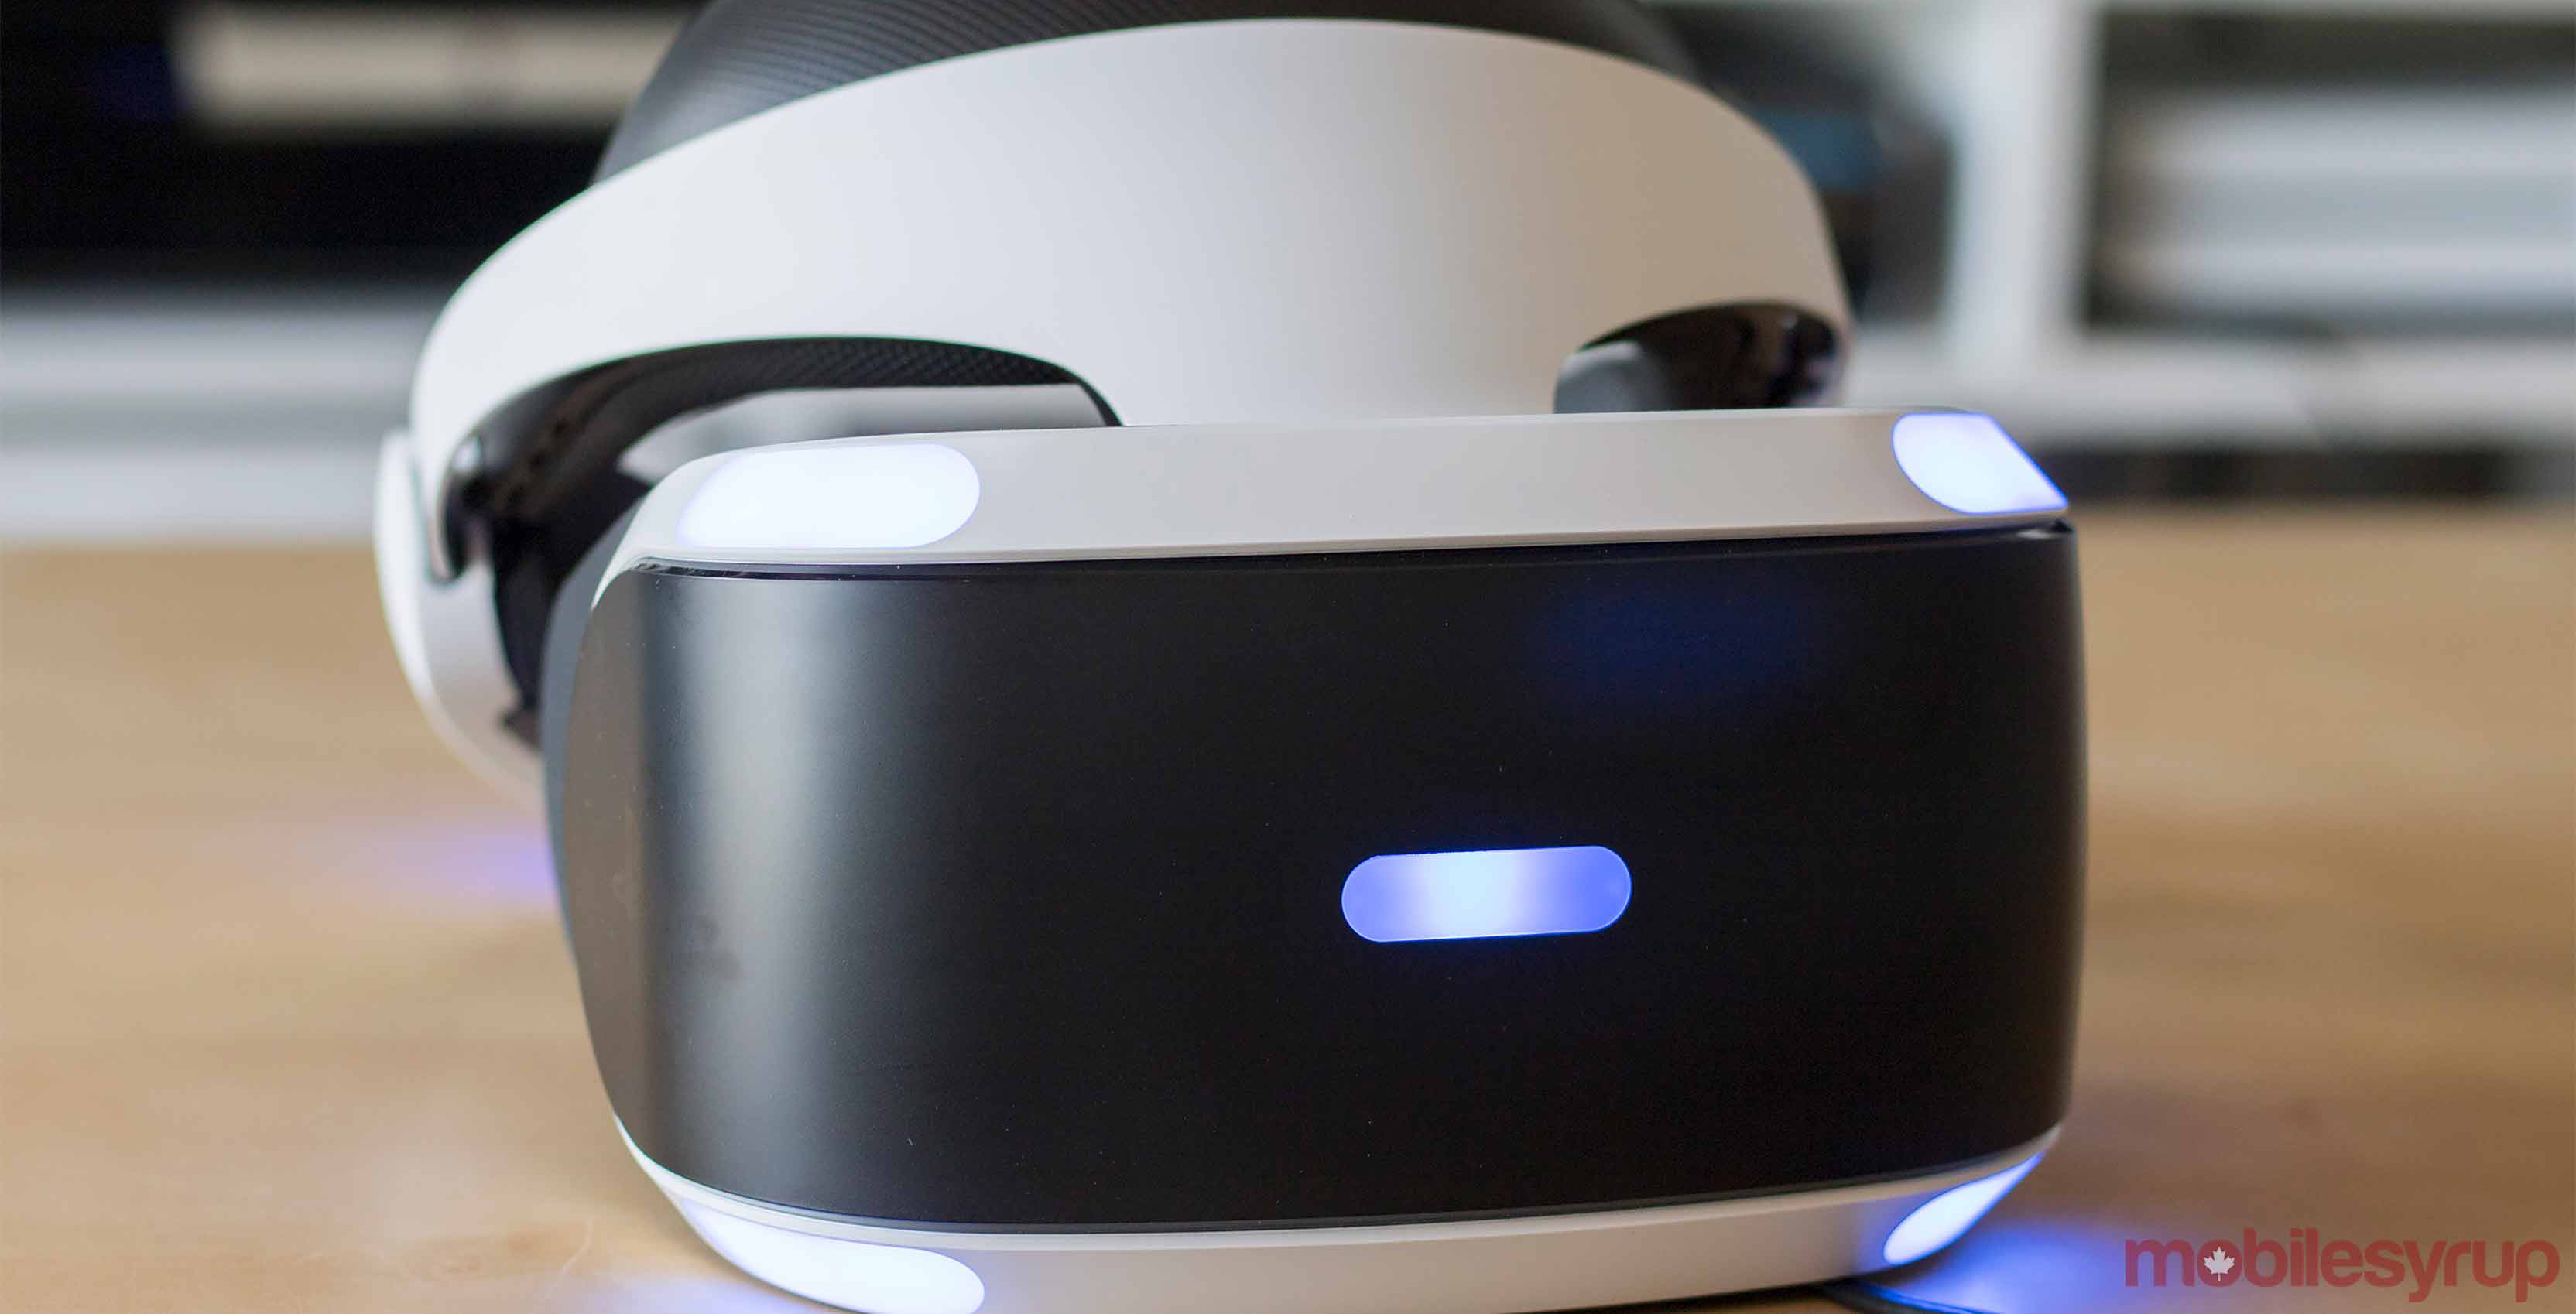 PlayStation VR headset on table